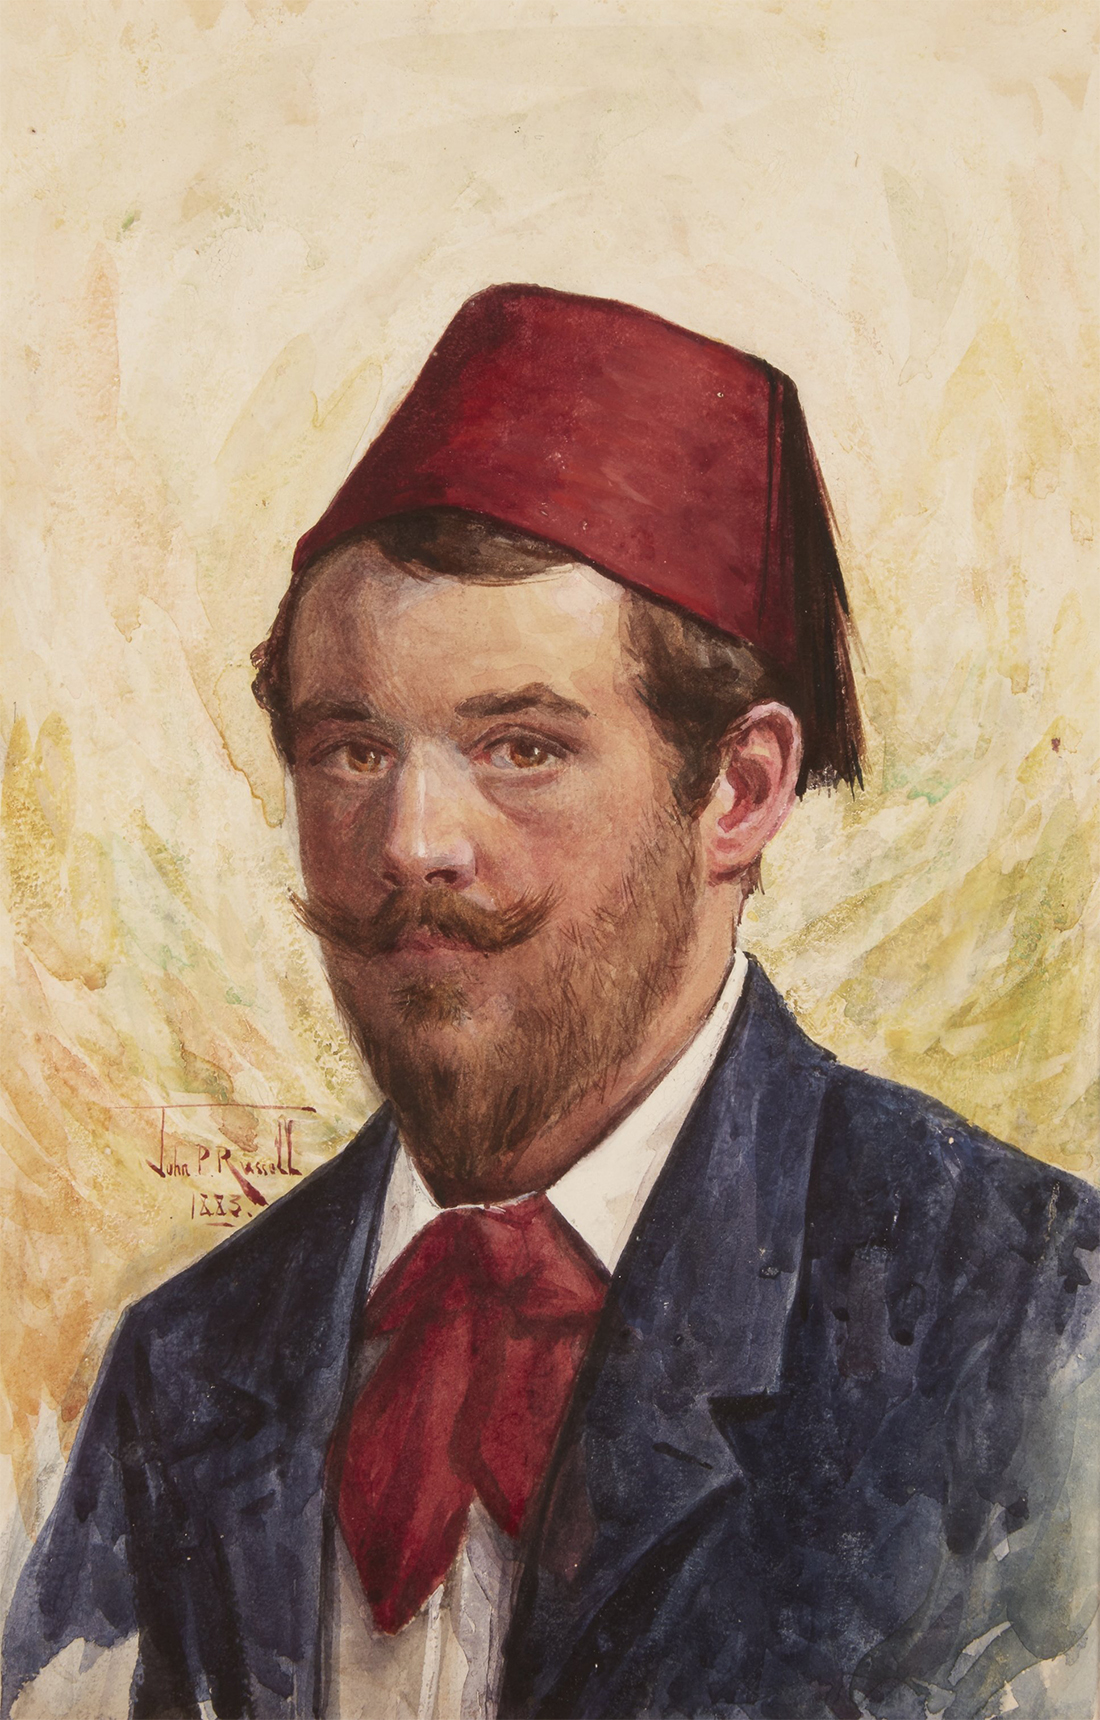 John Russell 'Untitled (Self-portrait in a red fez)' 1883. Private collection, Mudgee, NSW Photo: AGNSW, Jenni Carter